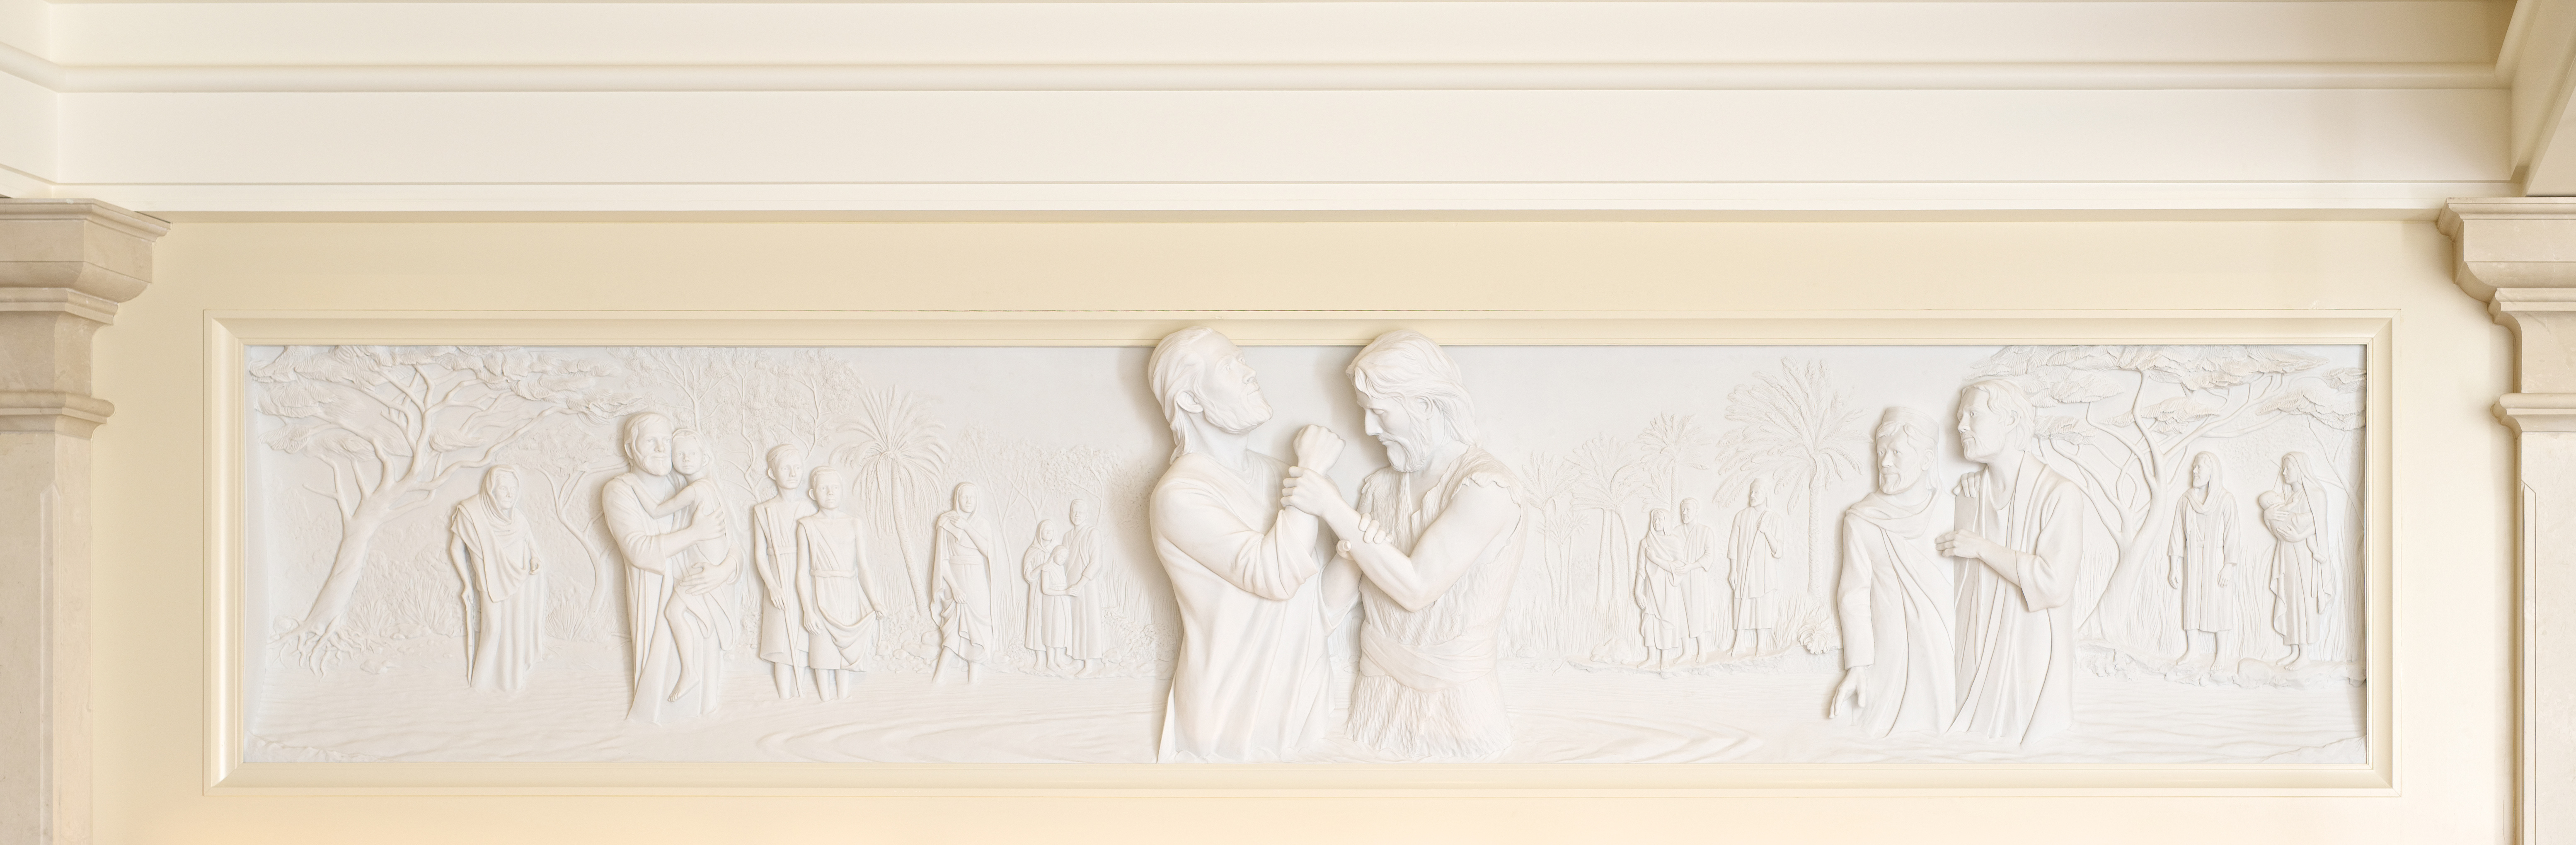 Indianapolis_Temple_Baptistry-Relief_2015.jpg